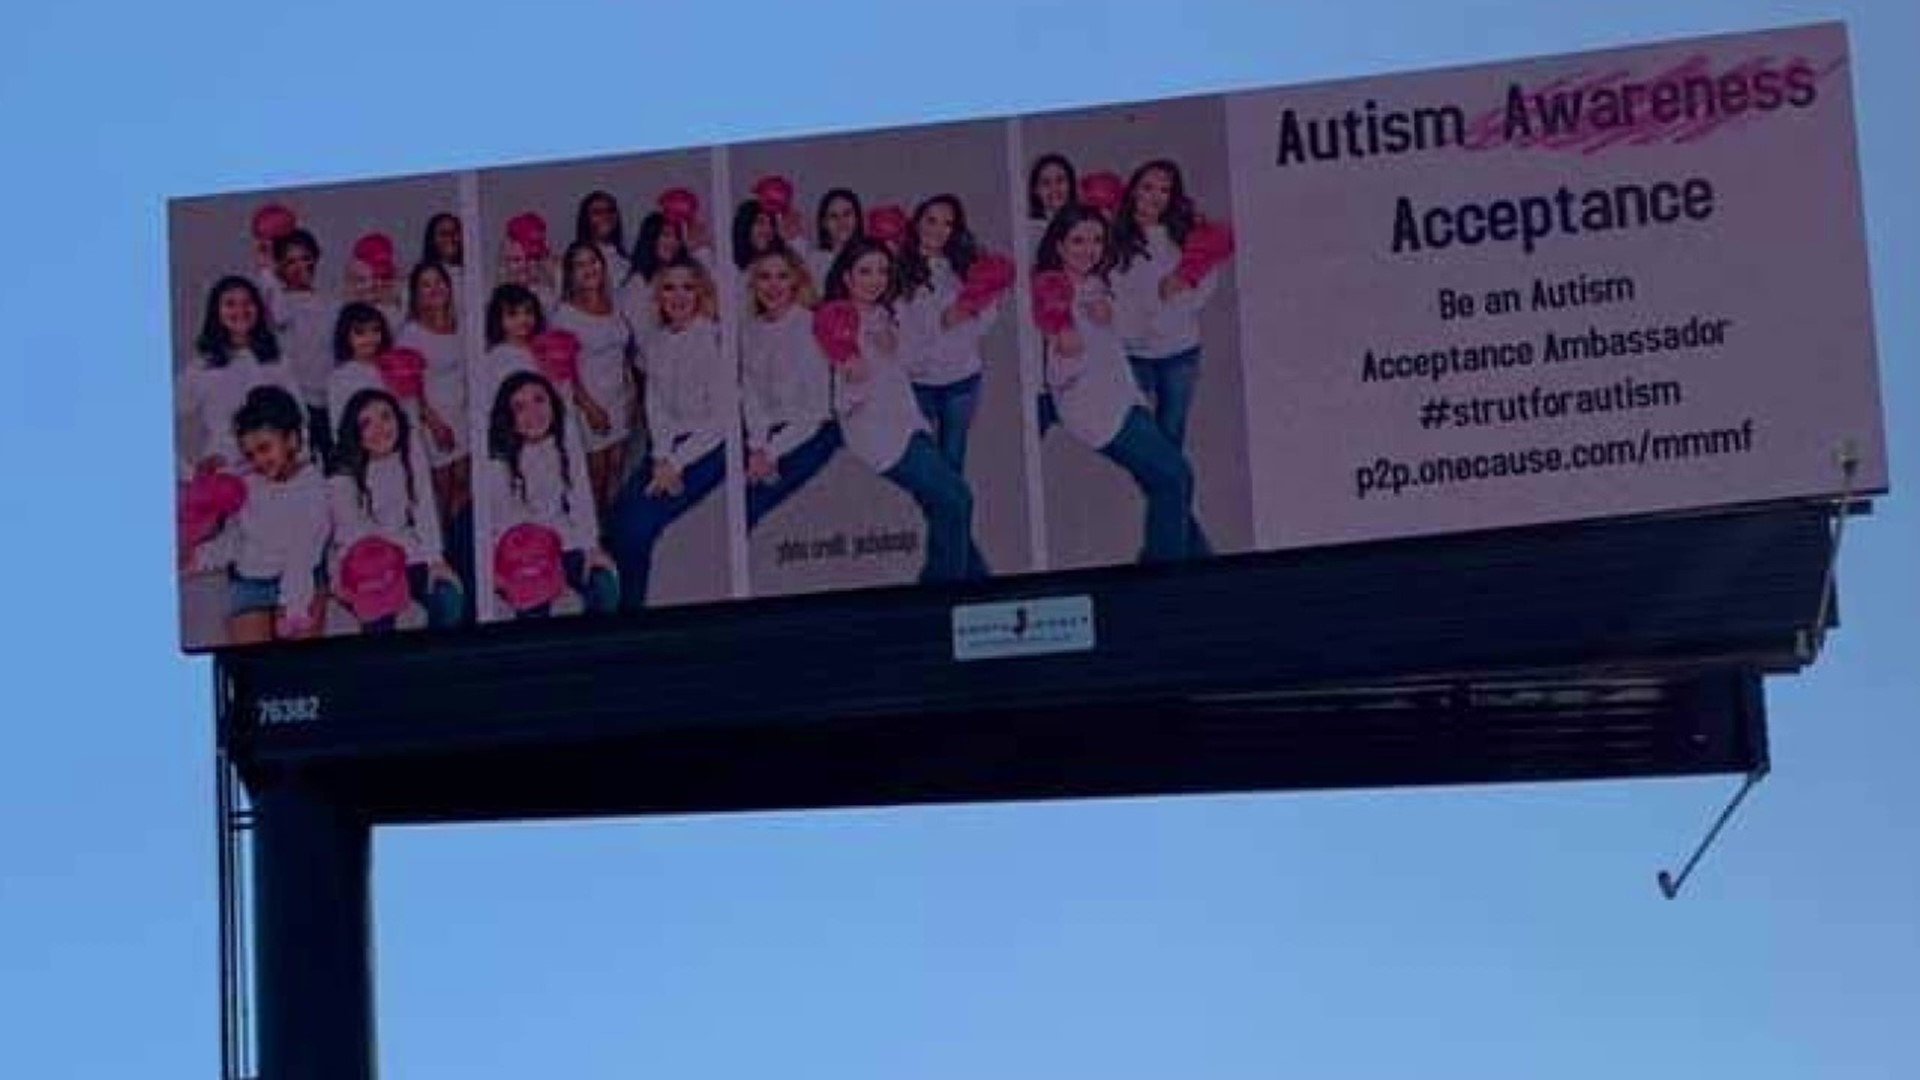 A girl in the Poconos is being featured on billboards for her help raising money and awareness for people with autism.